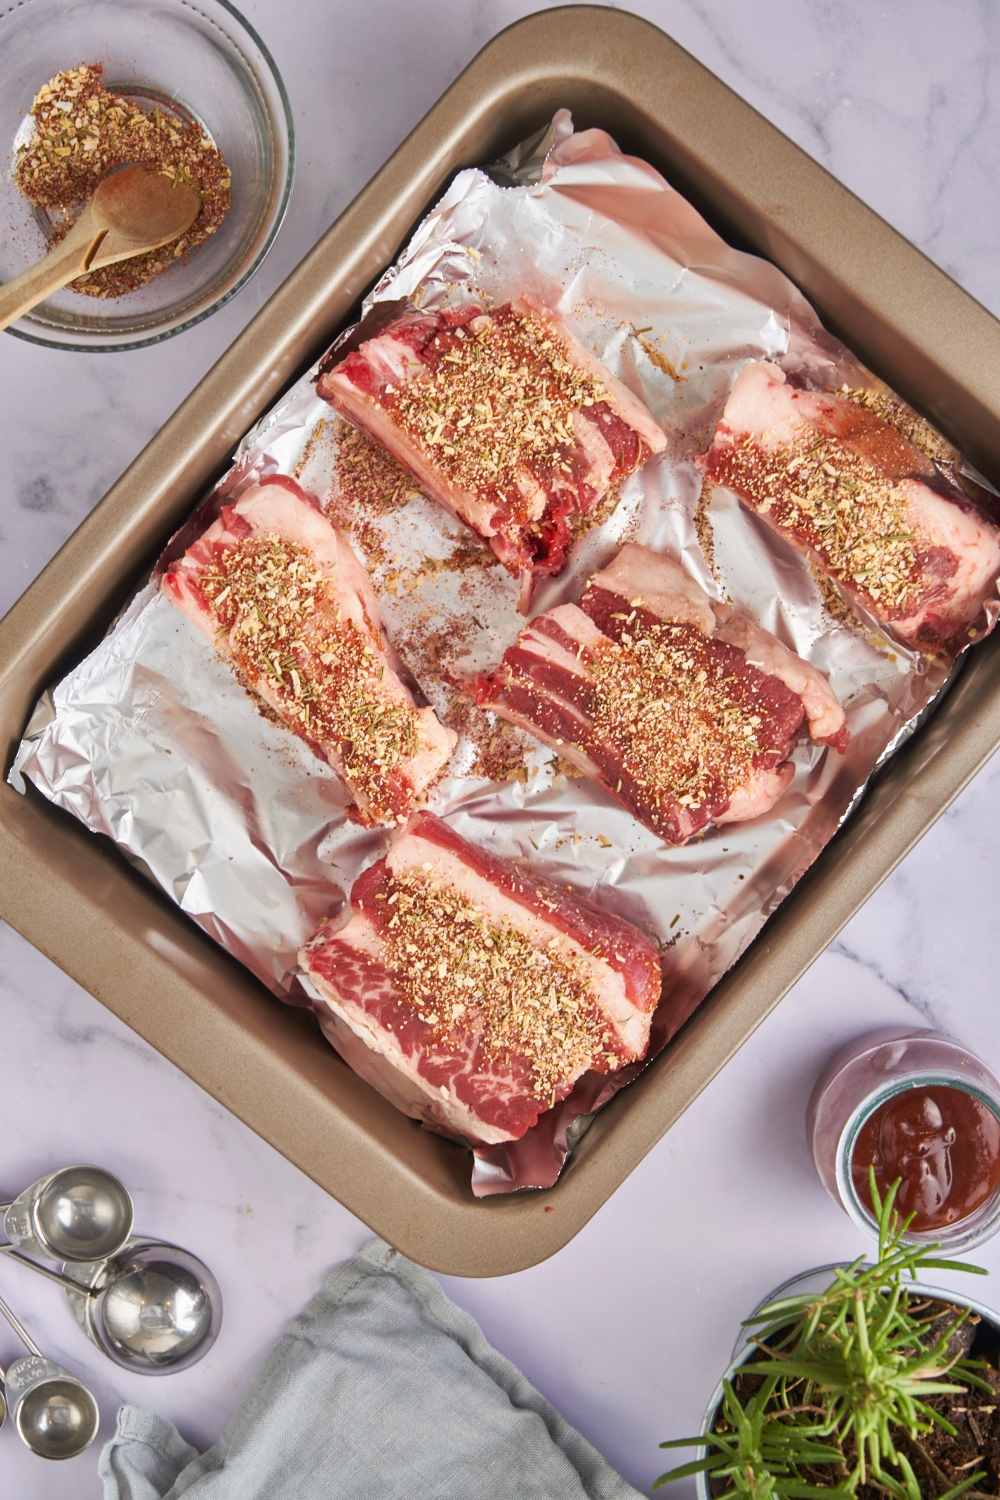 Five beef back ribs covered in a spice blend spread evenly on a baking sheet lined with foil.